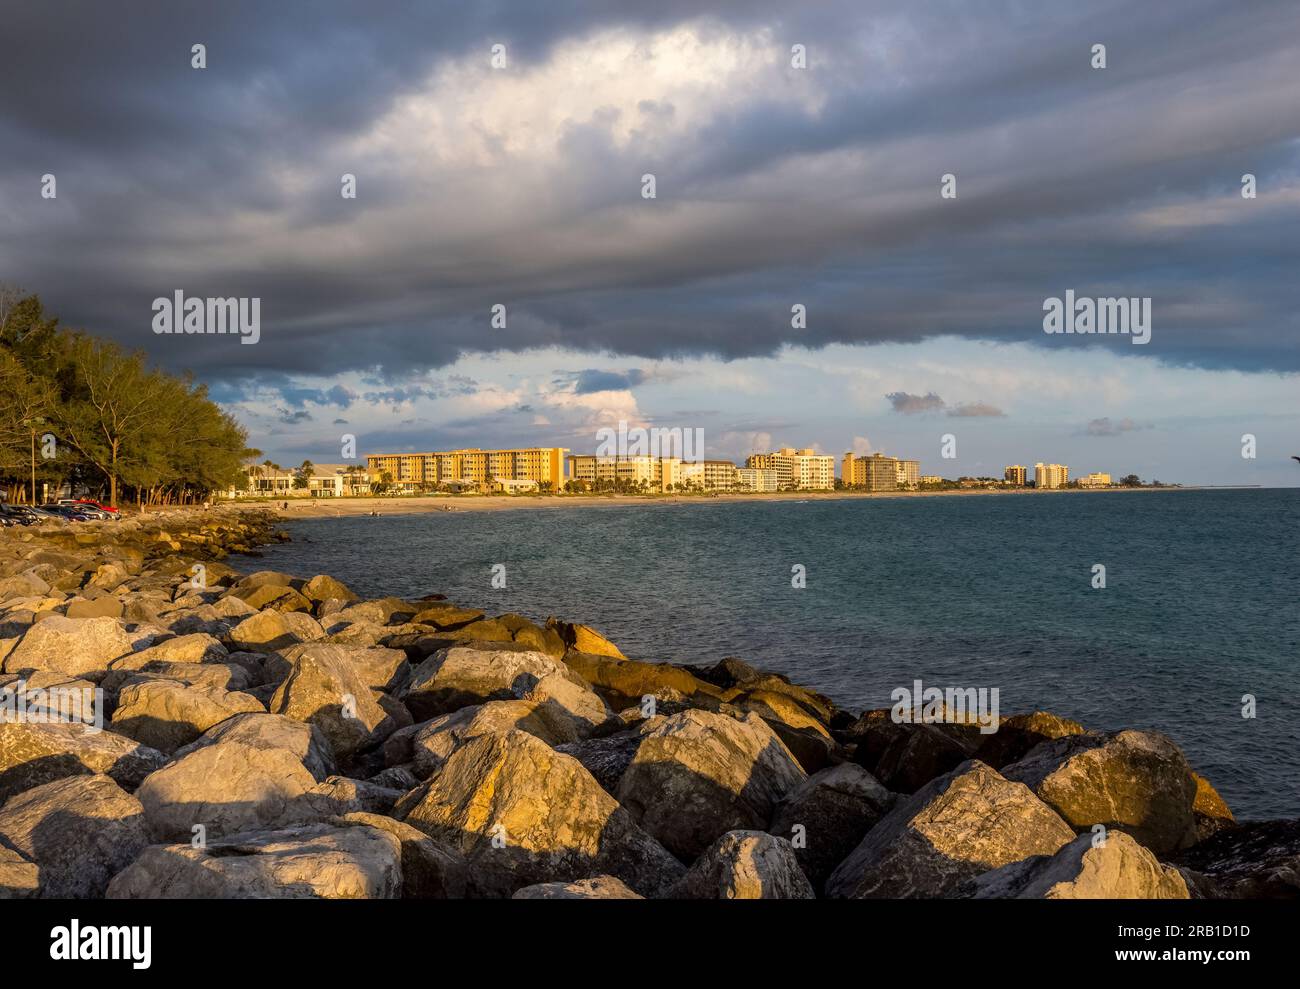 Storm in the sky over Venice Florida and the Gulf of Mexico Stock Photo